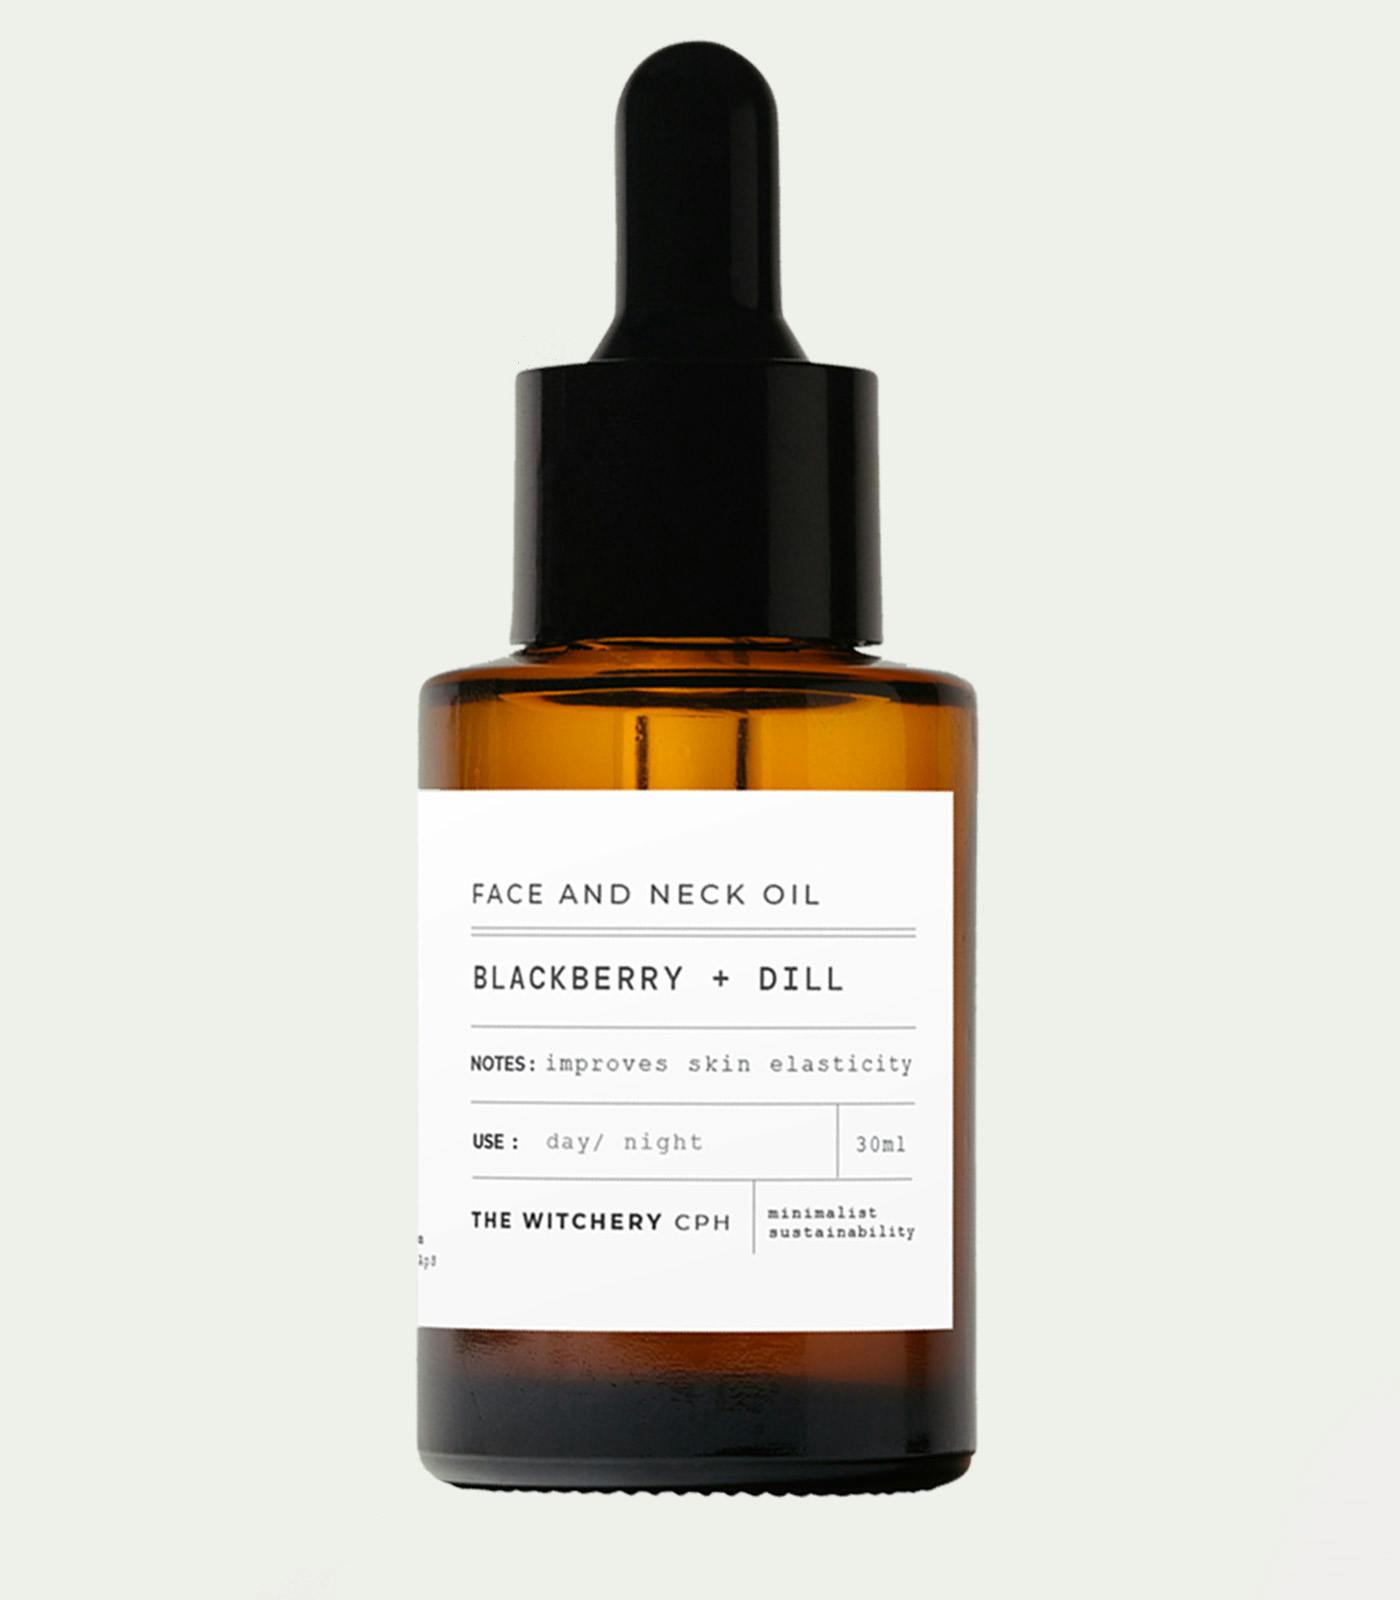 Nordic berries, dill oil, blackberry seed oil, potent anti ageing, skin repair oil, face and neck oil, face serum